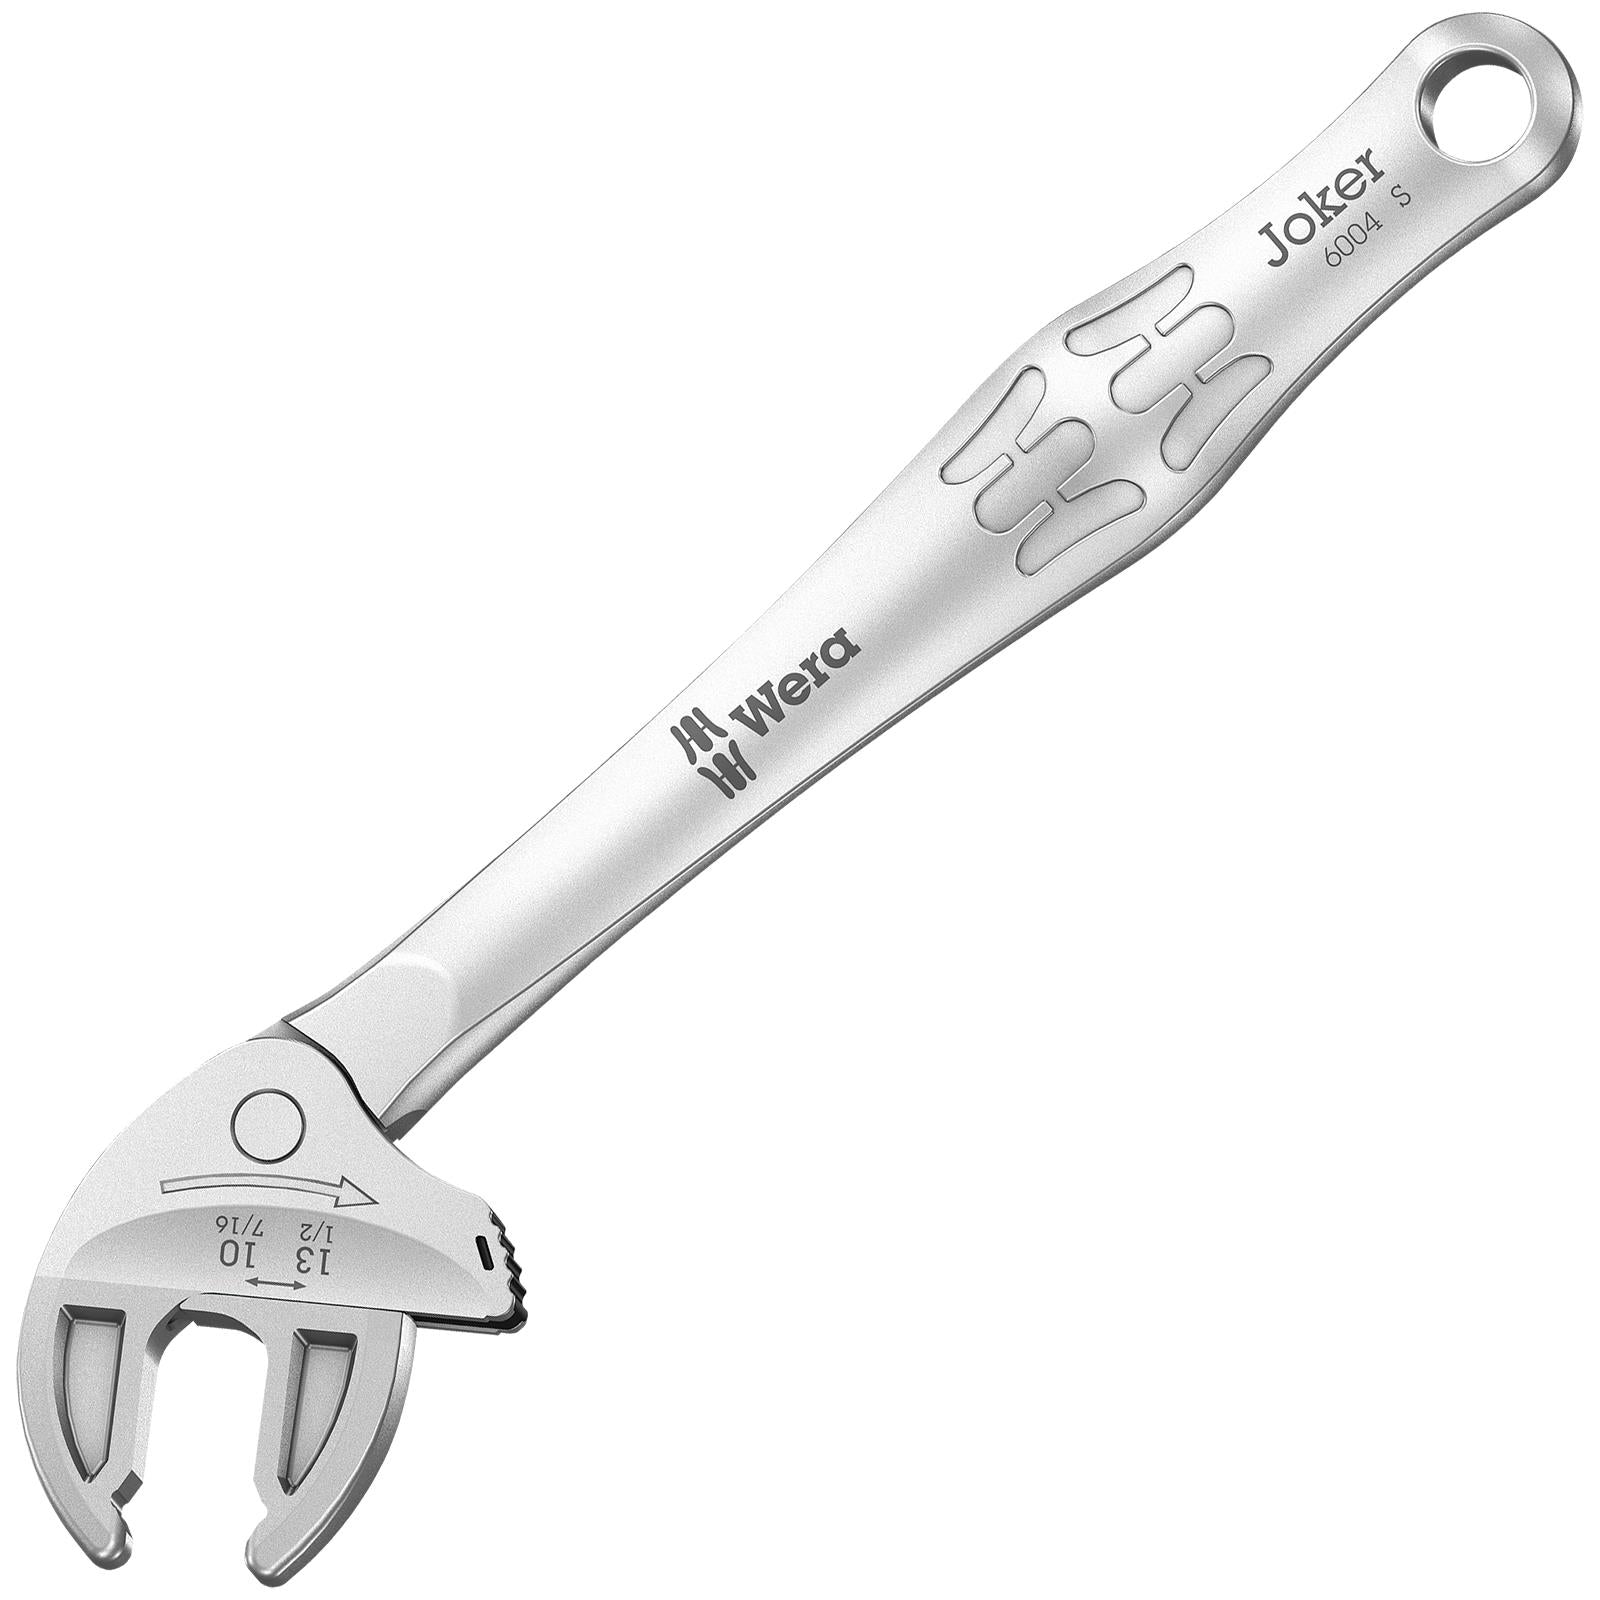 Wera 6004 Joker VDE Insulated Self Setting Spanner Wrench Large 05020153001  